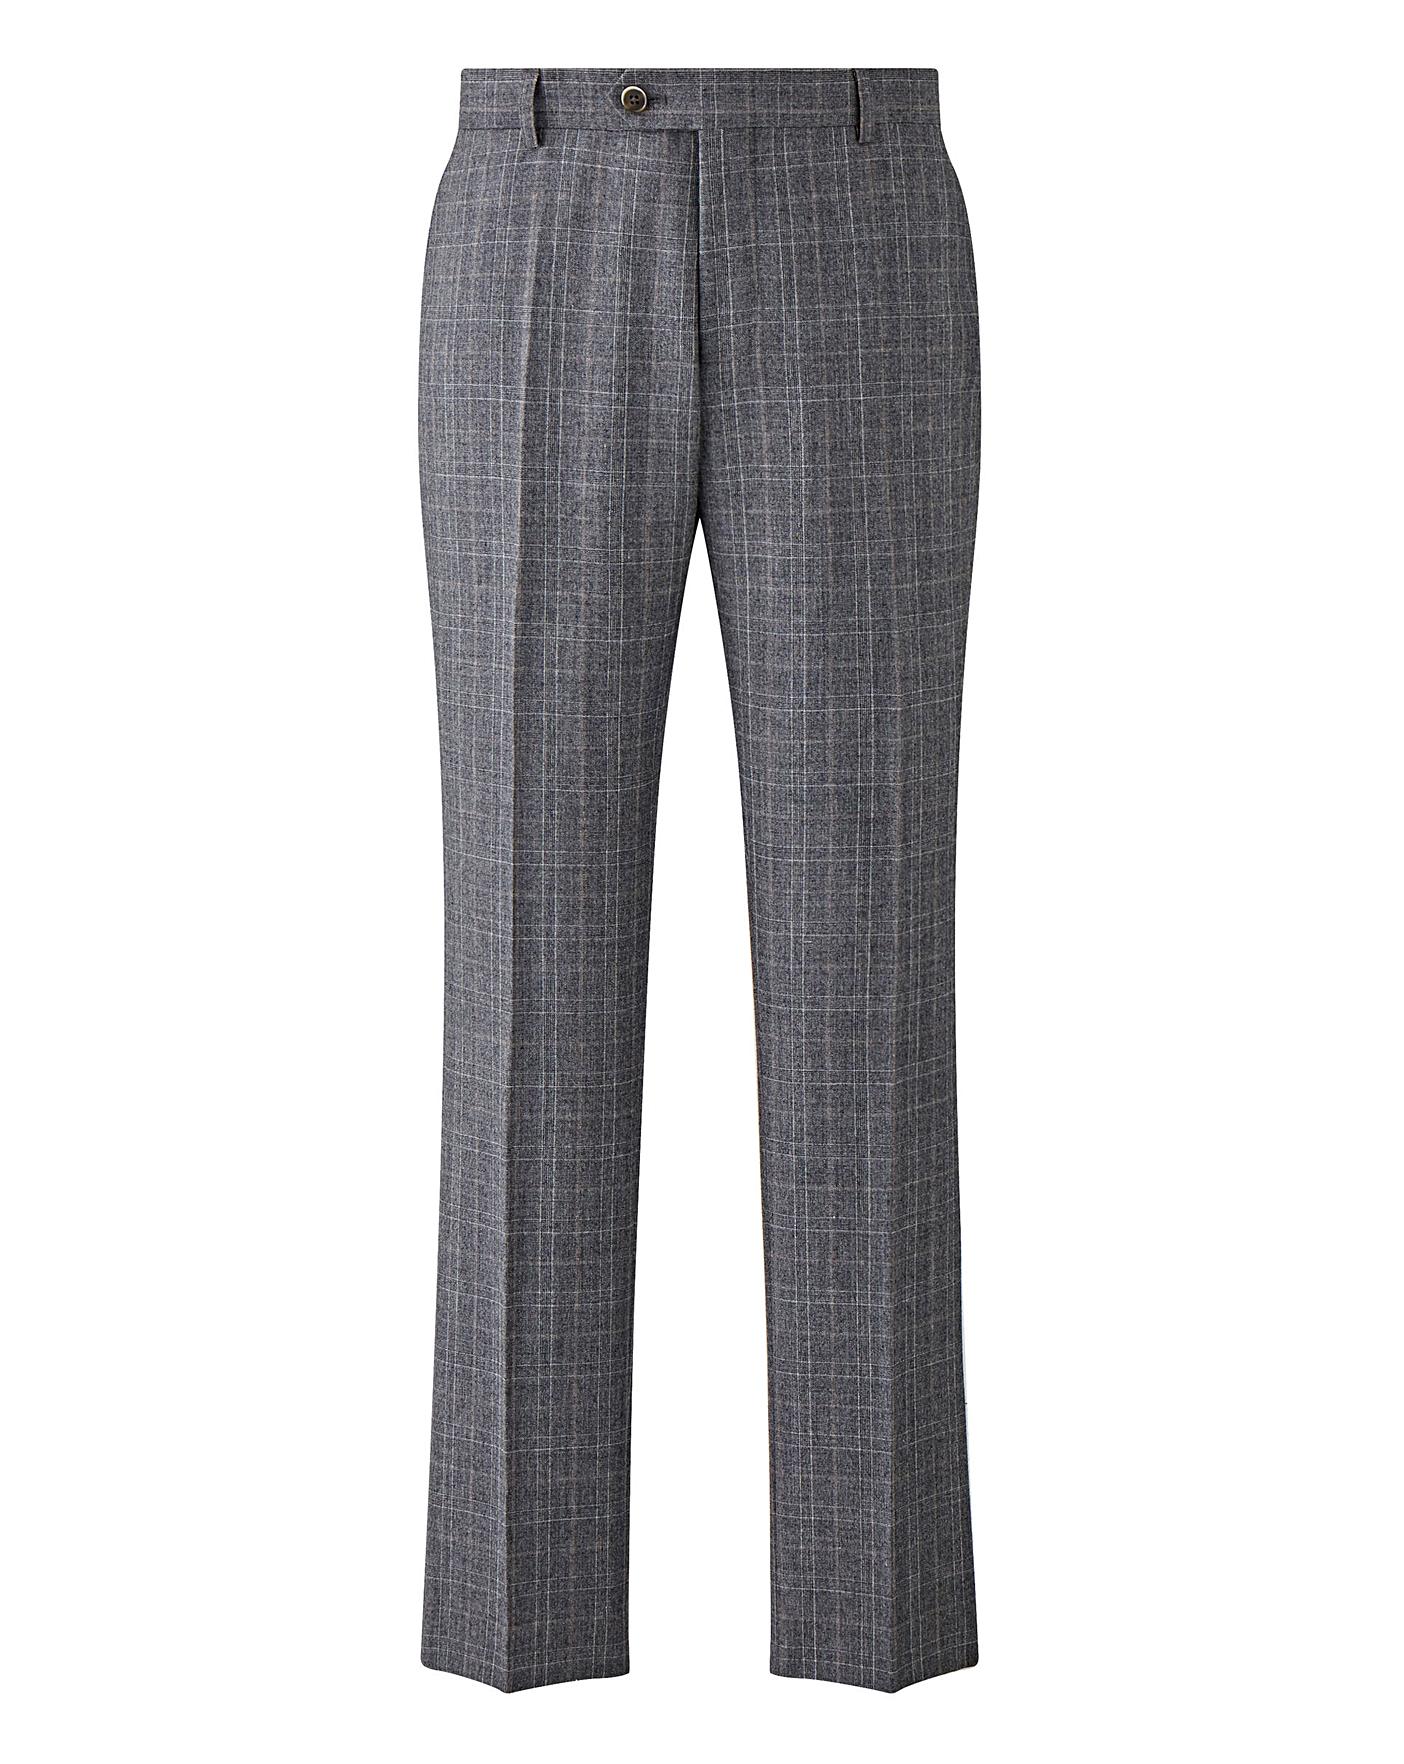 Shop BOSS Slim-Fit Checked Trousers With Zipped Hems | Saks Fifth Avenue